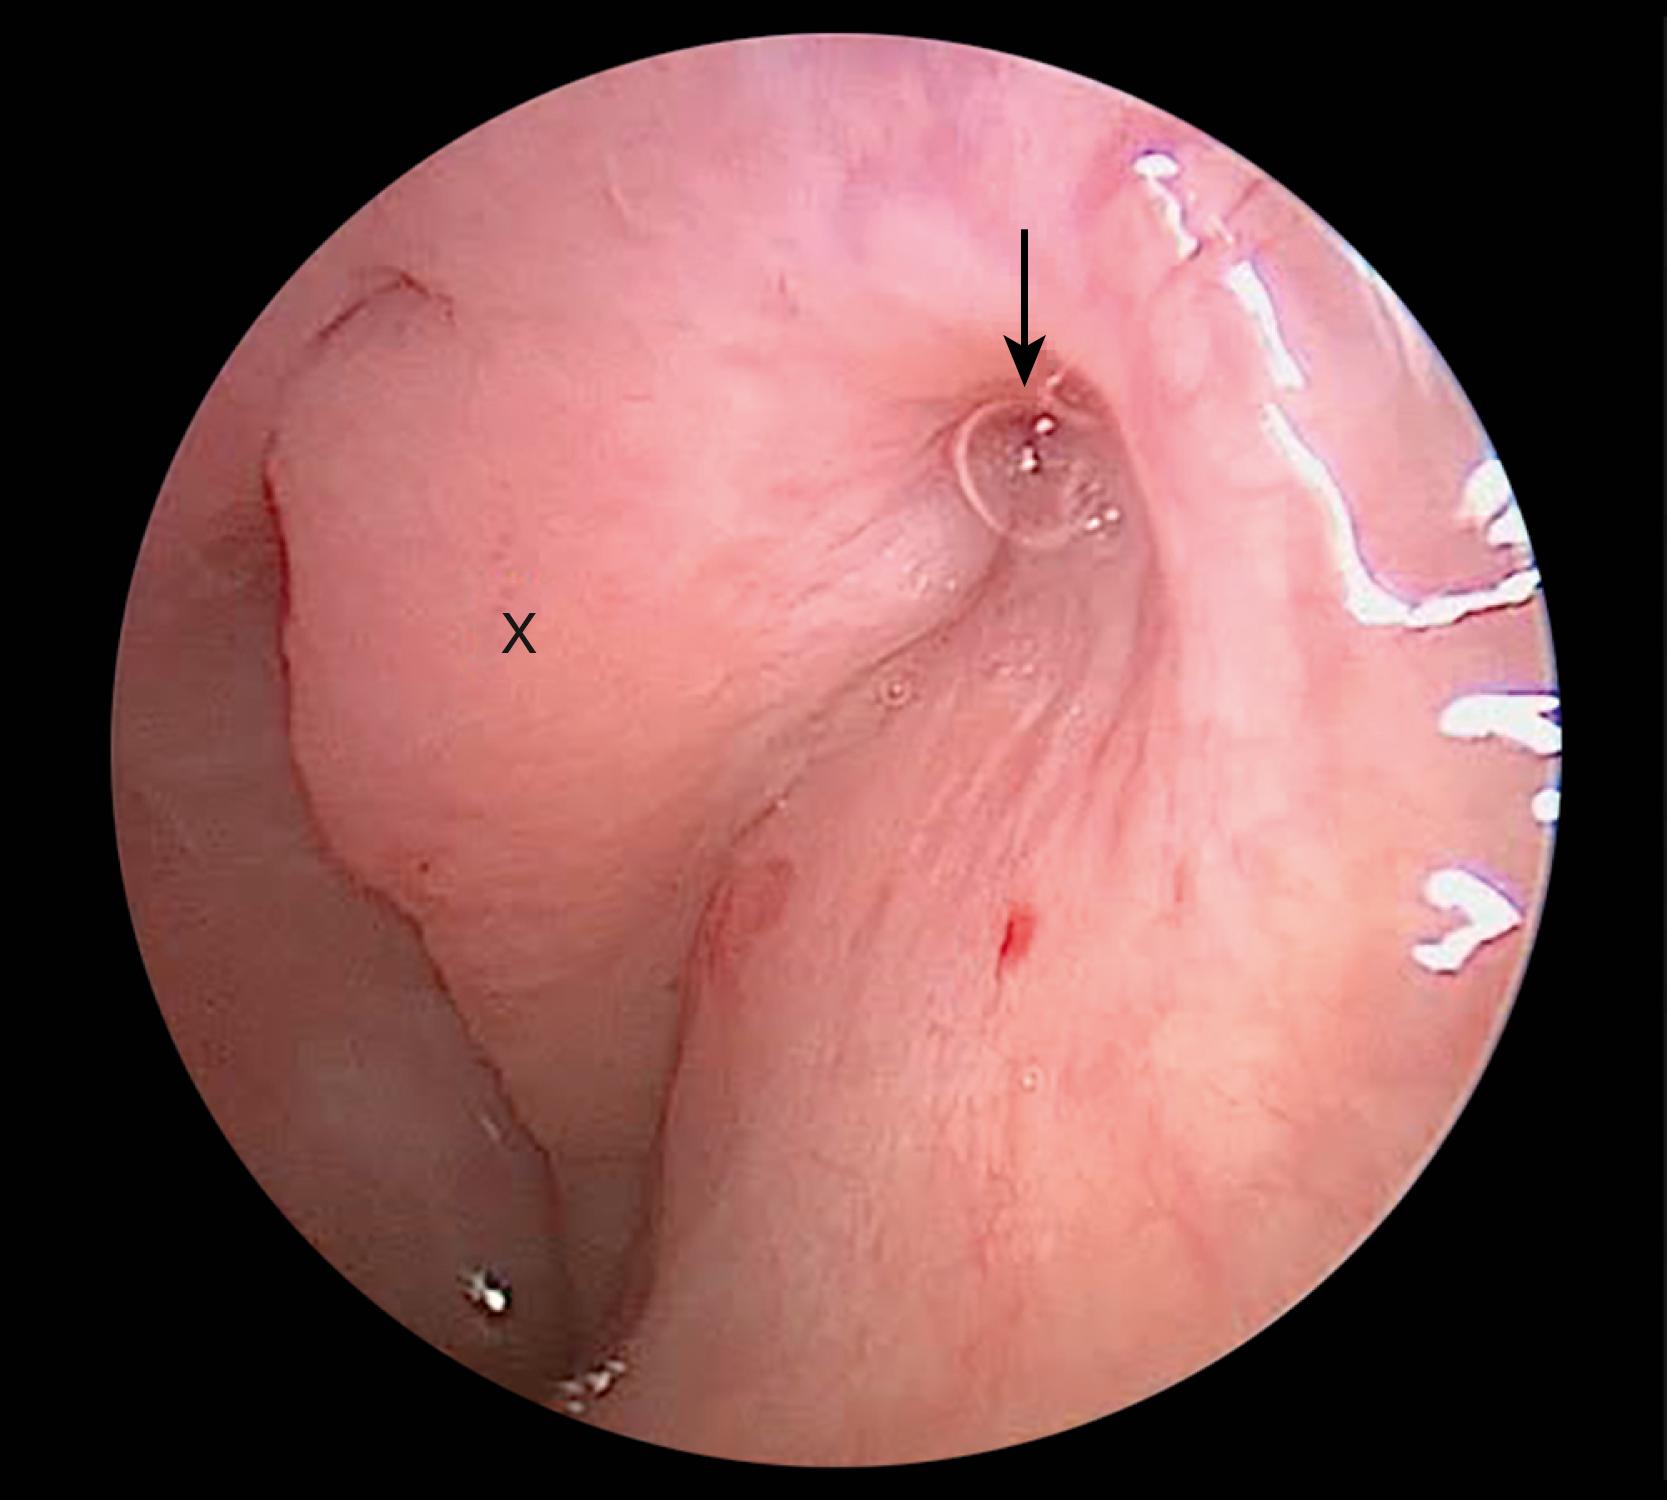 Fig. 129.1, Endoscopic view of the nasopharyngeal opening of a left eustachian tube showing significant peritubal inflammation. X, posterior cushion lined with hypertrophic mucosa. Arrow, collapsed lumen of the eustachian tube with secretions.